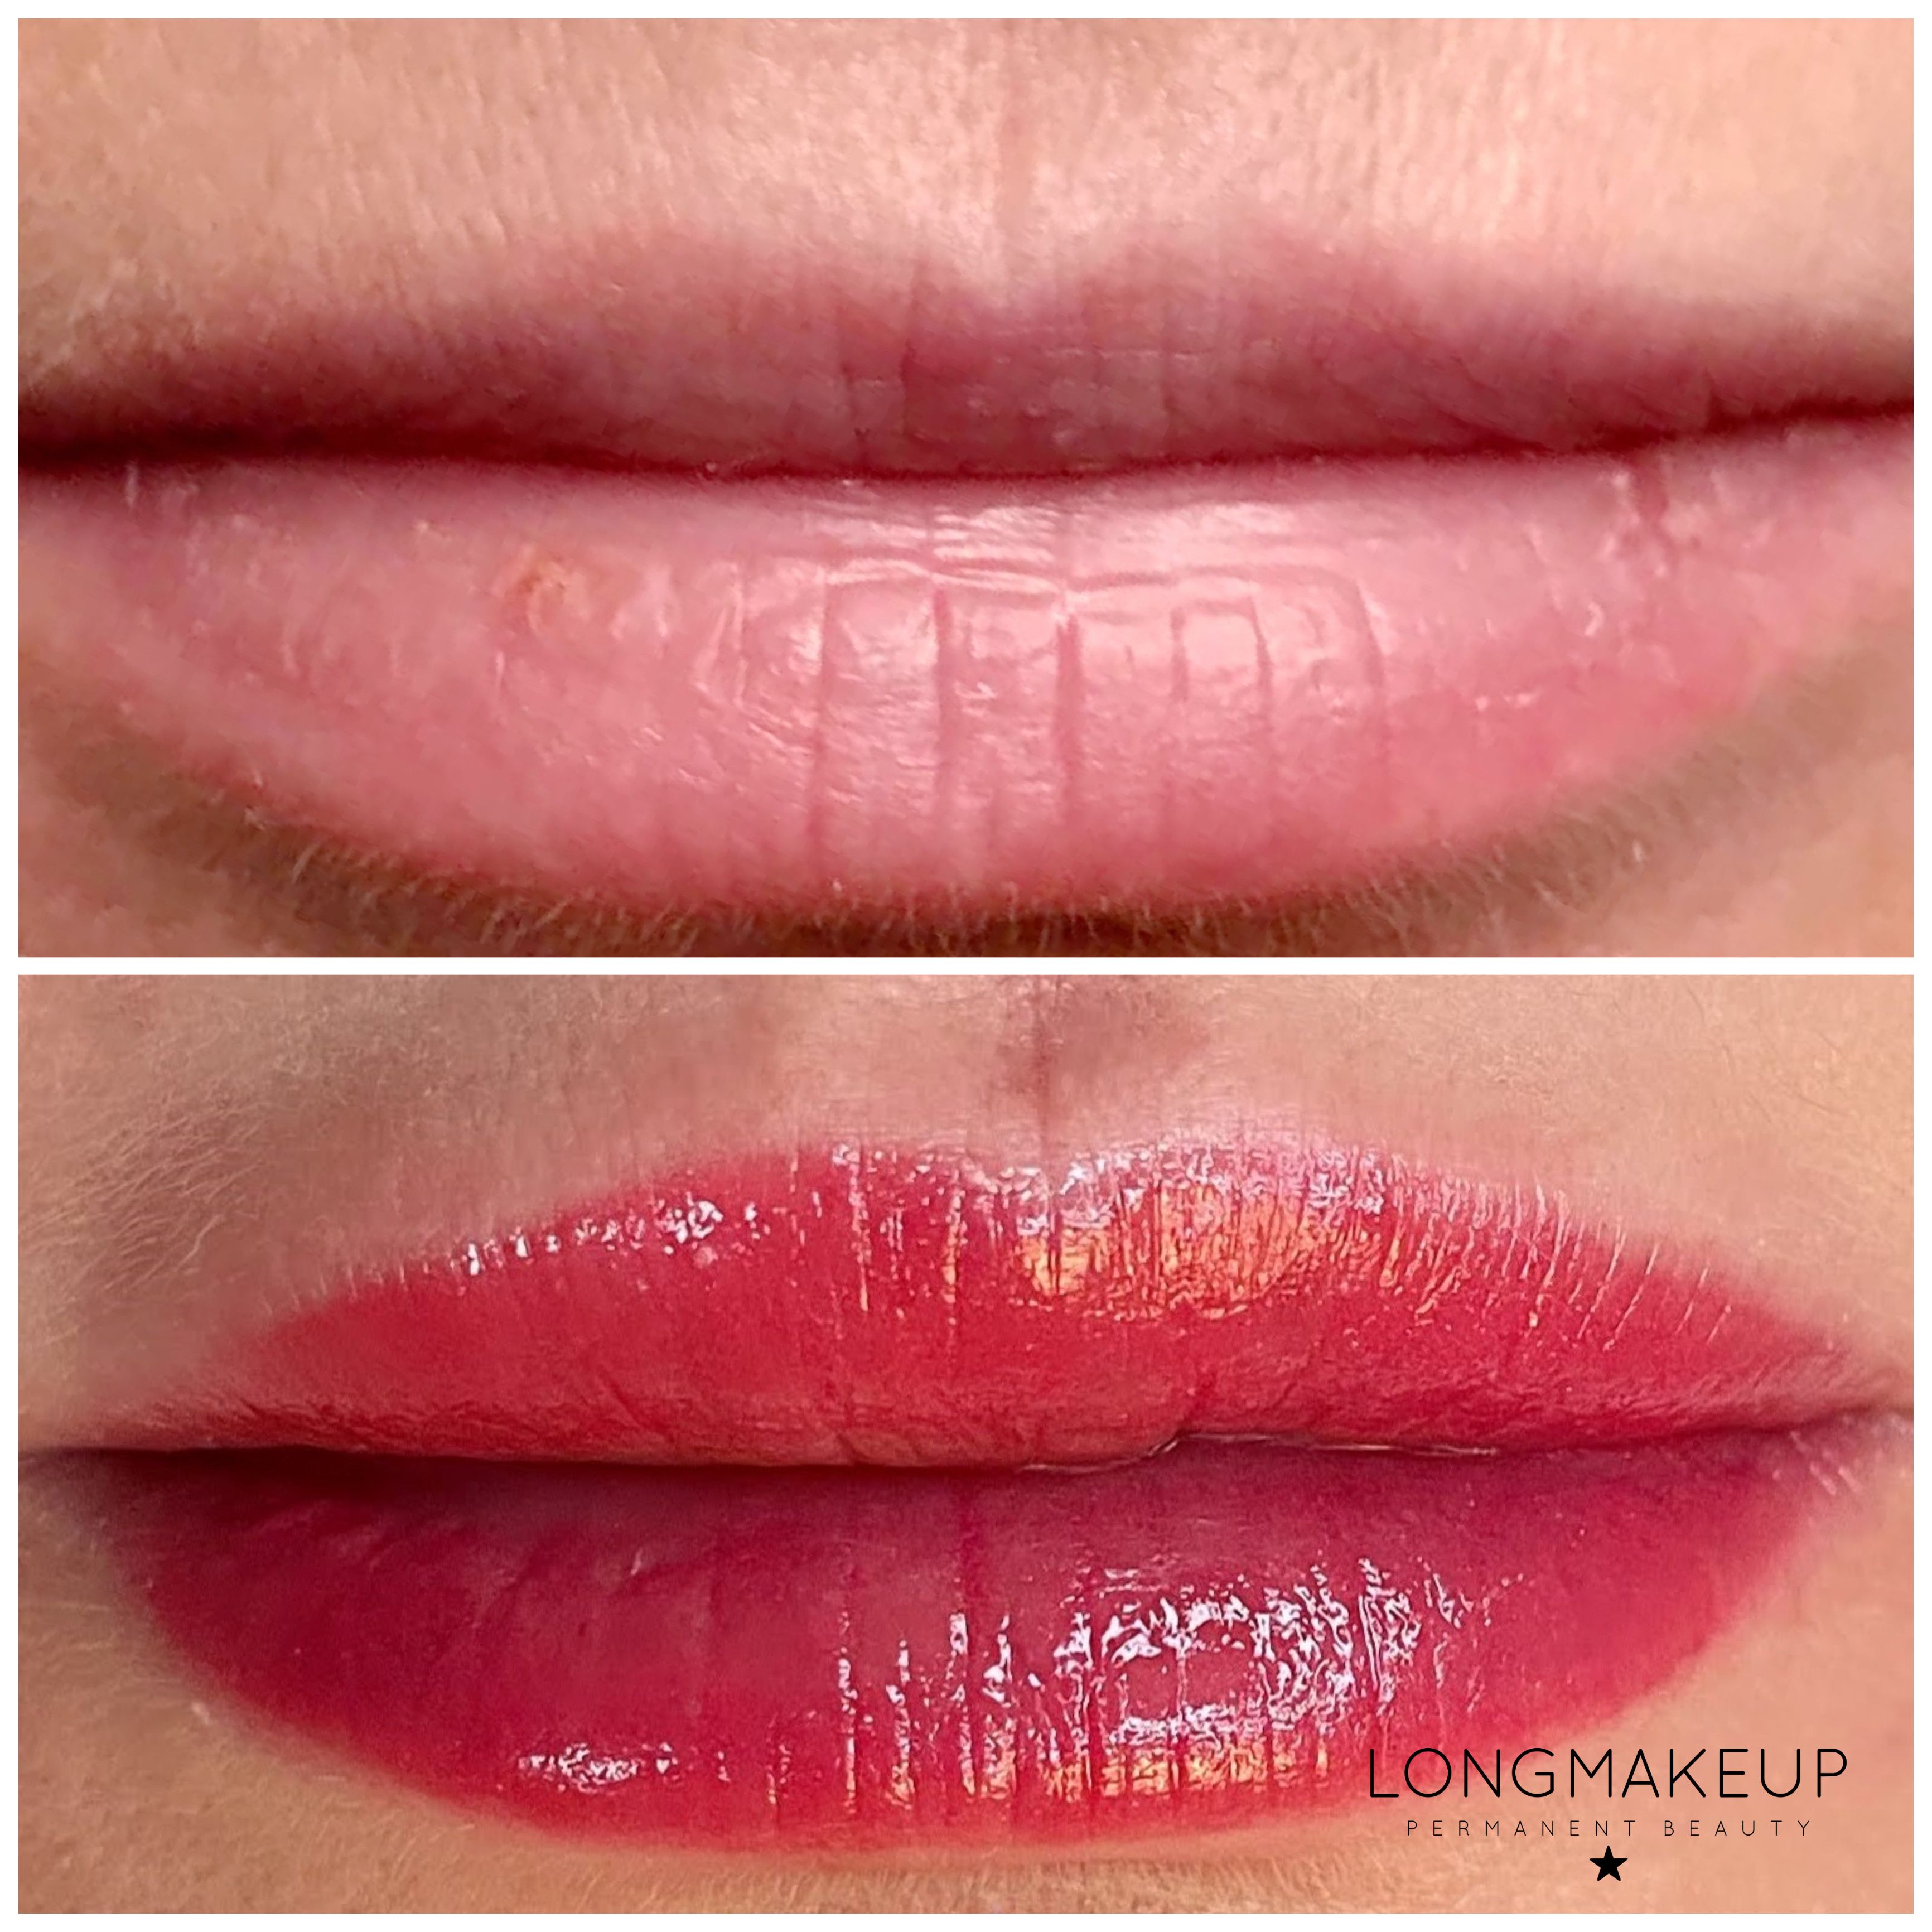 Before and after lip blushing